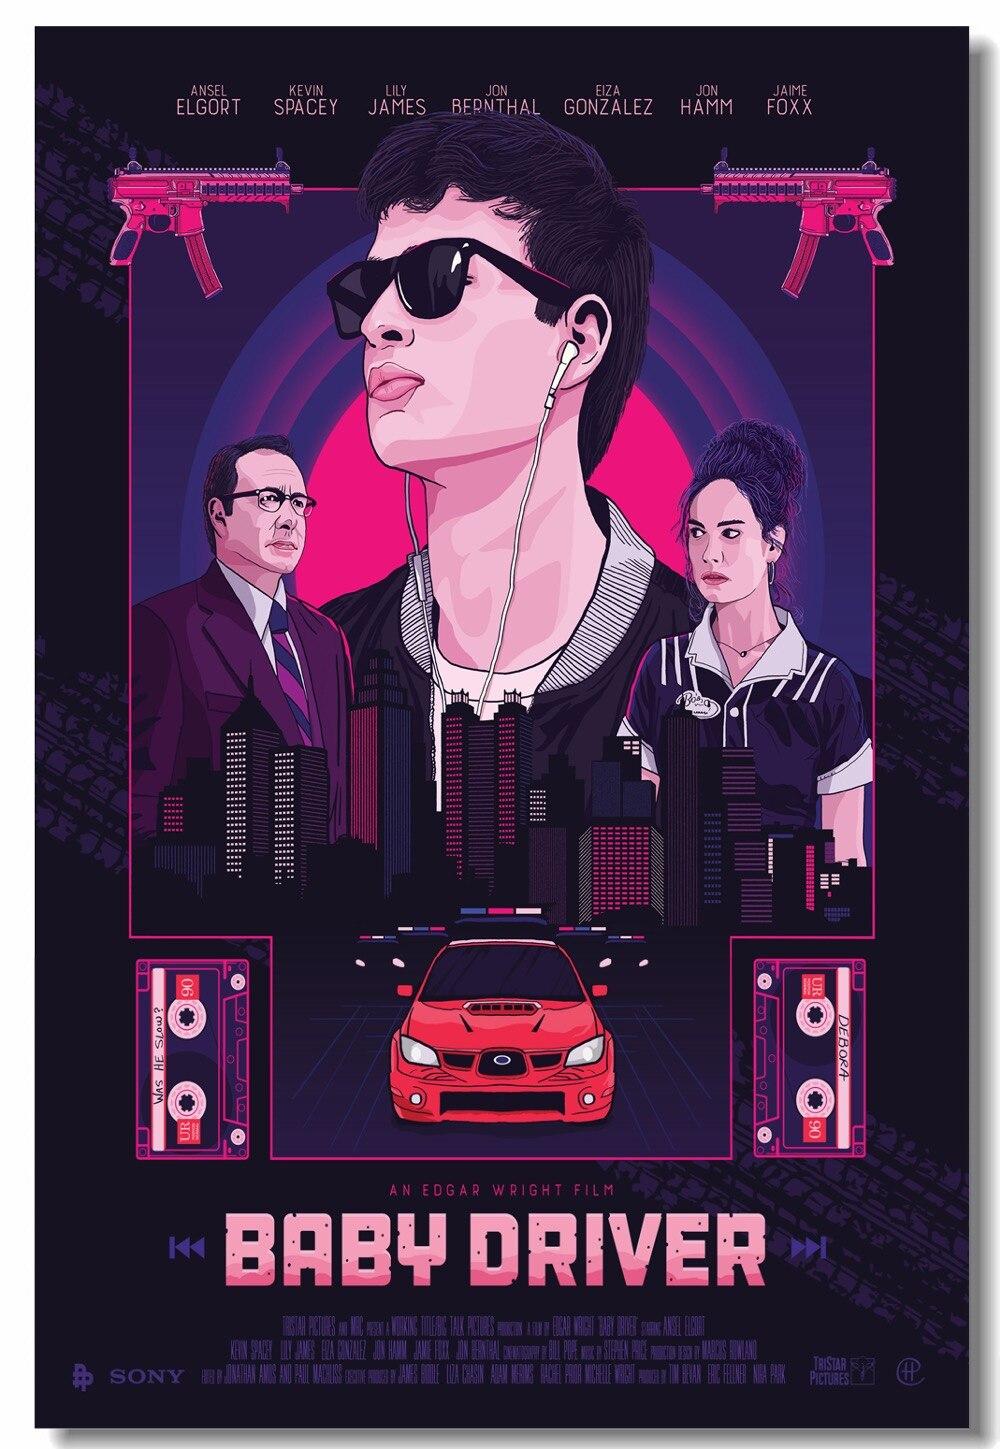 US $7.99. Custom Canvas Wall Mural Baby Driver Movie Poster Baby Driver Wallpaper Jamie Foxx Stickers Office Living Room Decoration #-in Wall